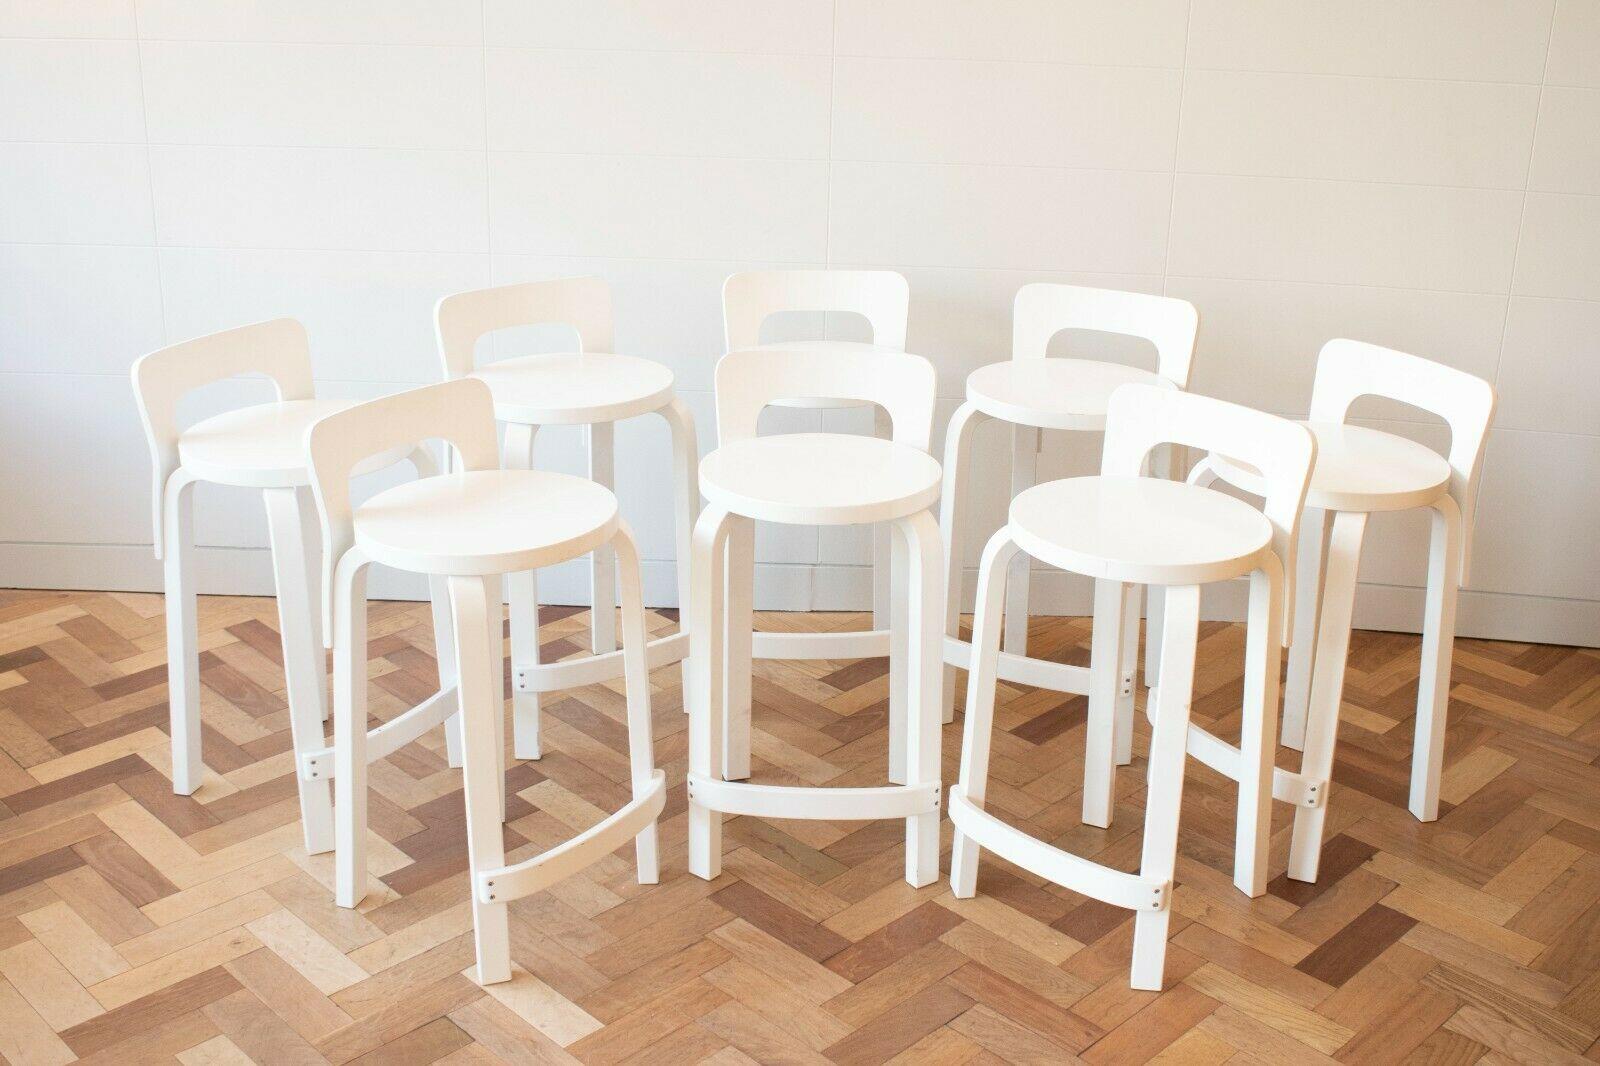 Set of 8 bar/kitchen high chair model K65, designed by Alvar Aalto for Artek. These are a recent example of a design originating from 1935. 

The stools feature birch legs and a low back made of bent birch plywood. K65 is a timeless classic that